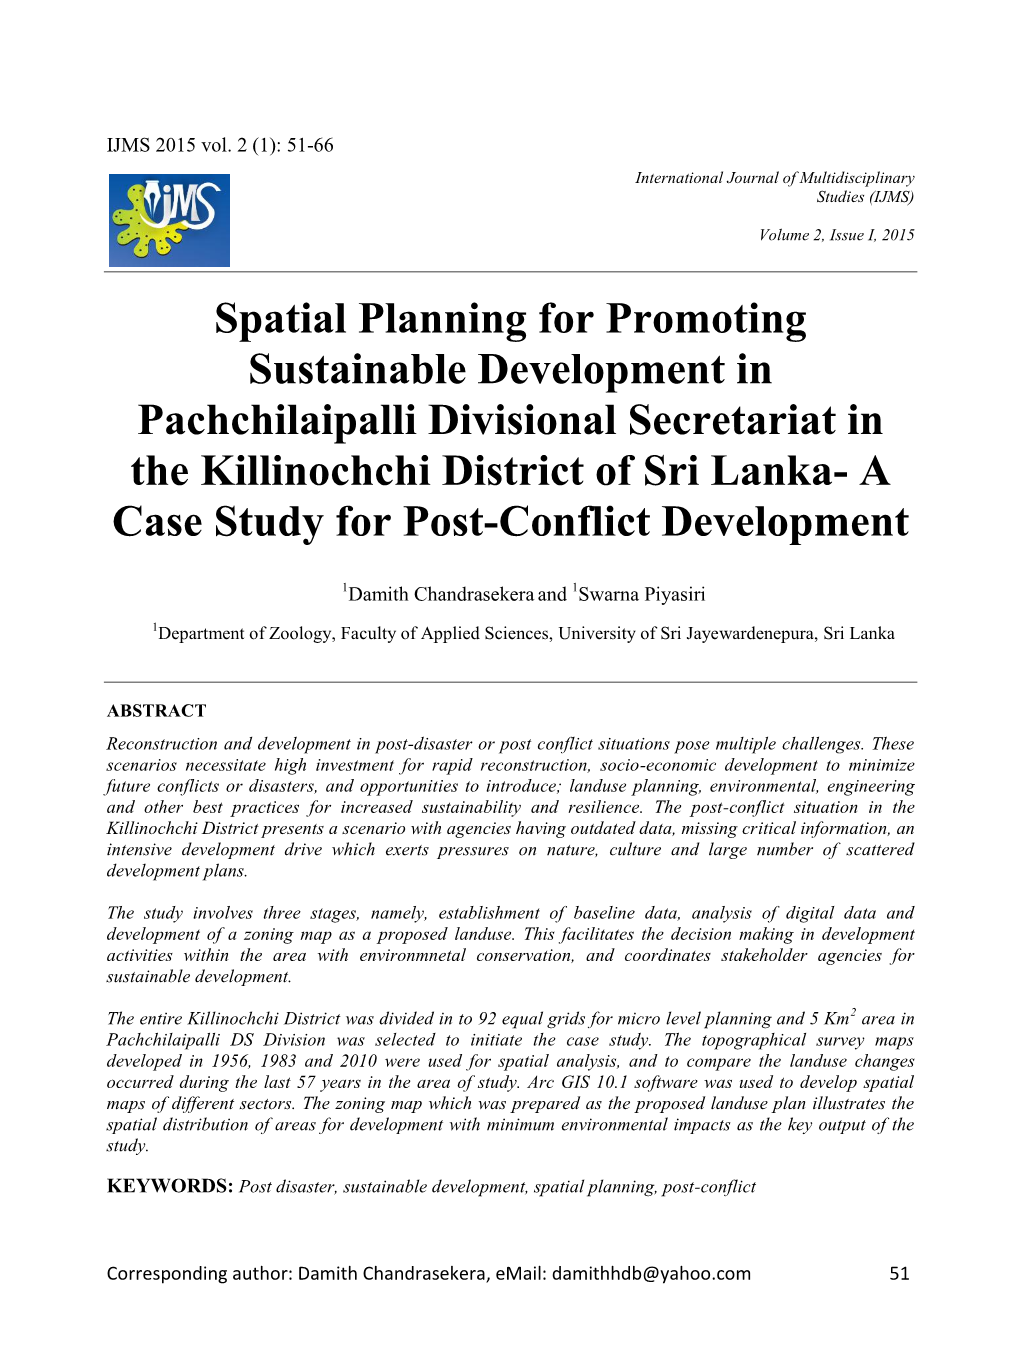 Spatial Planning for Promoting Sustainable Development In